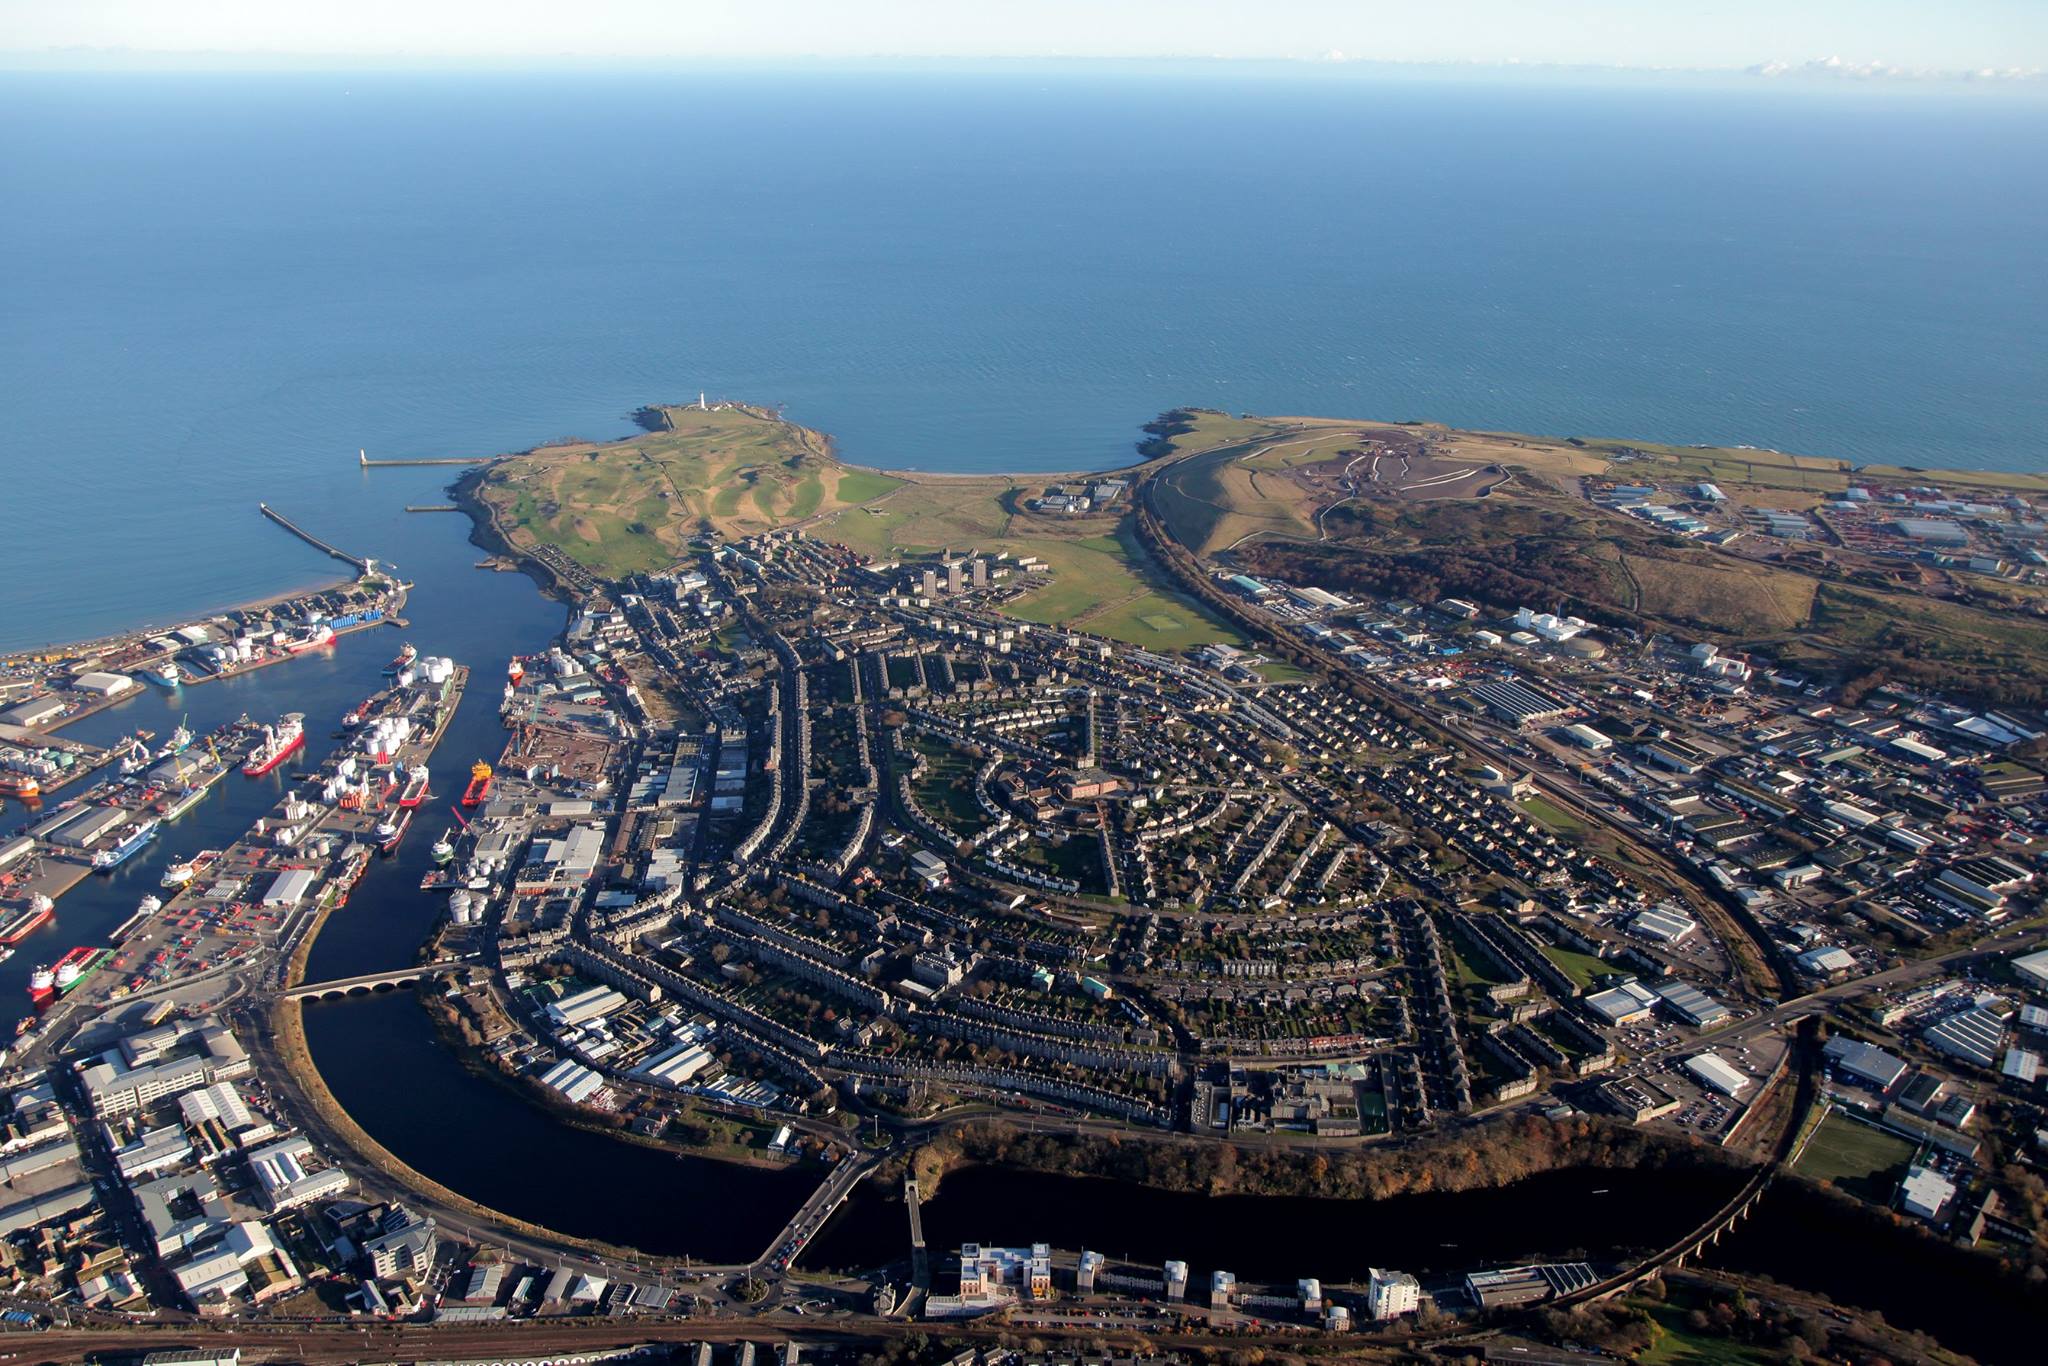 Torry from the sky